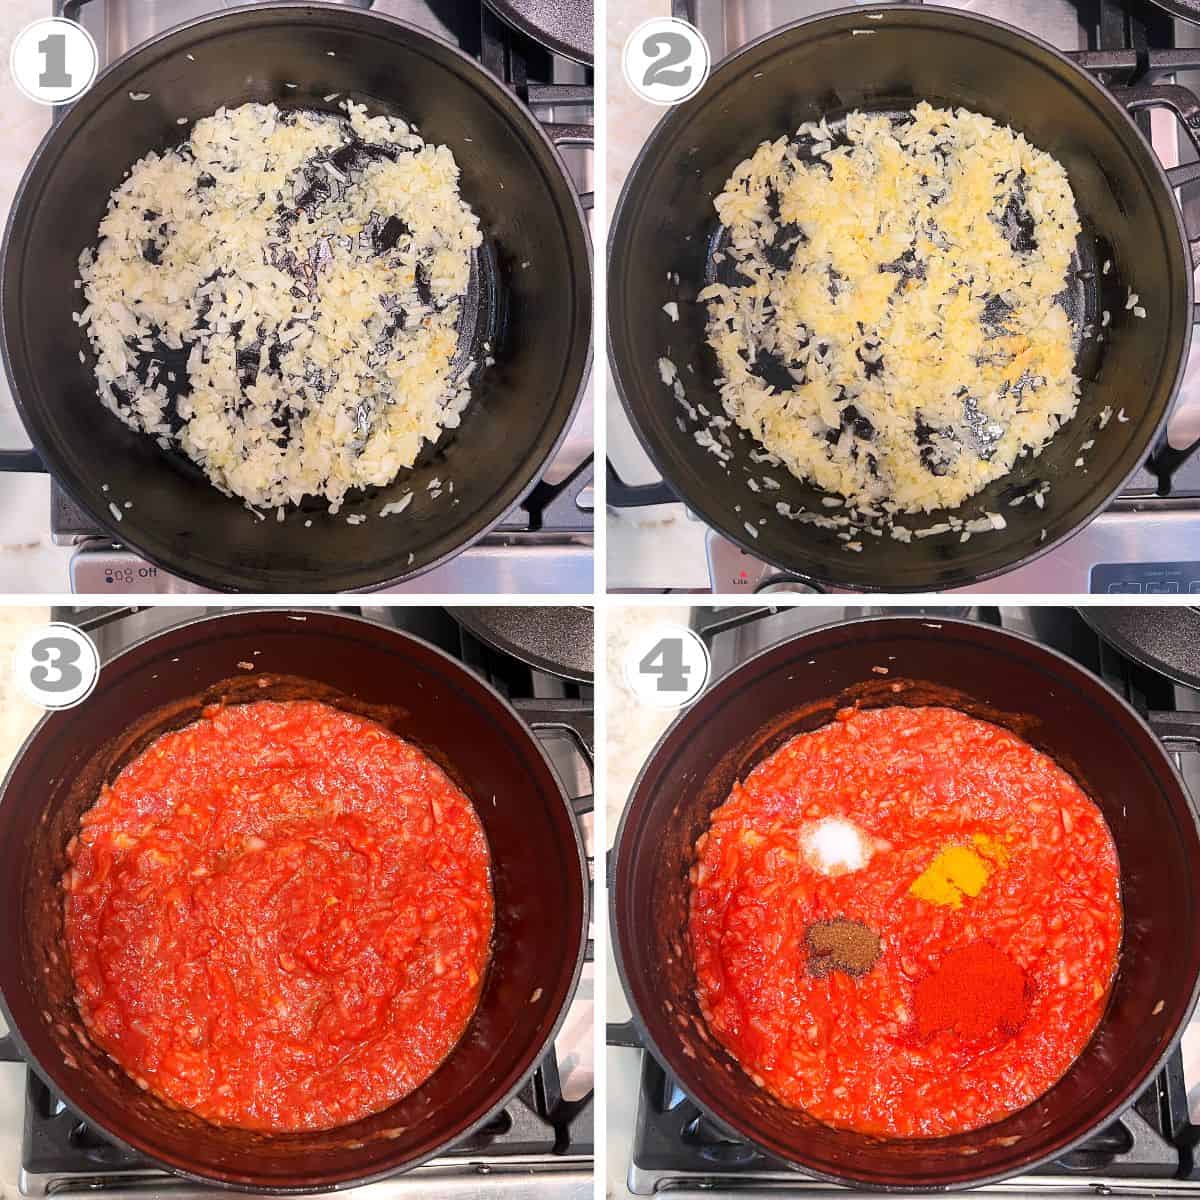 photos one through four showing how to make the shakshuka sauce 